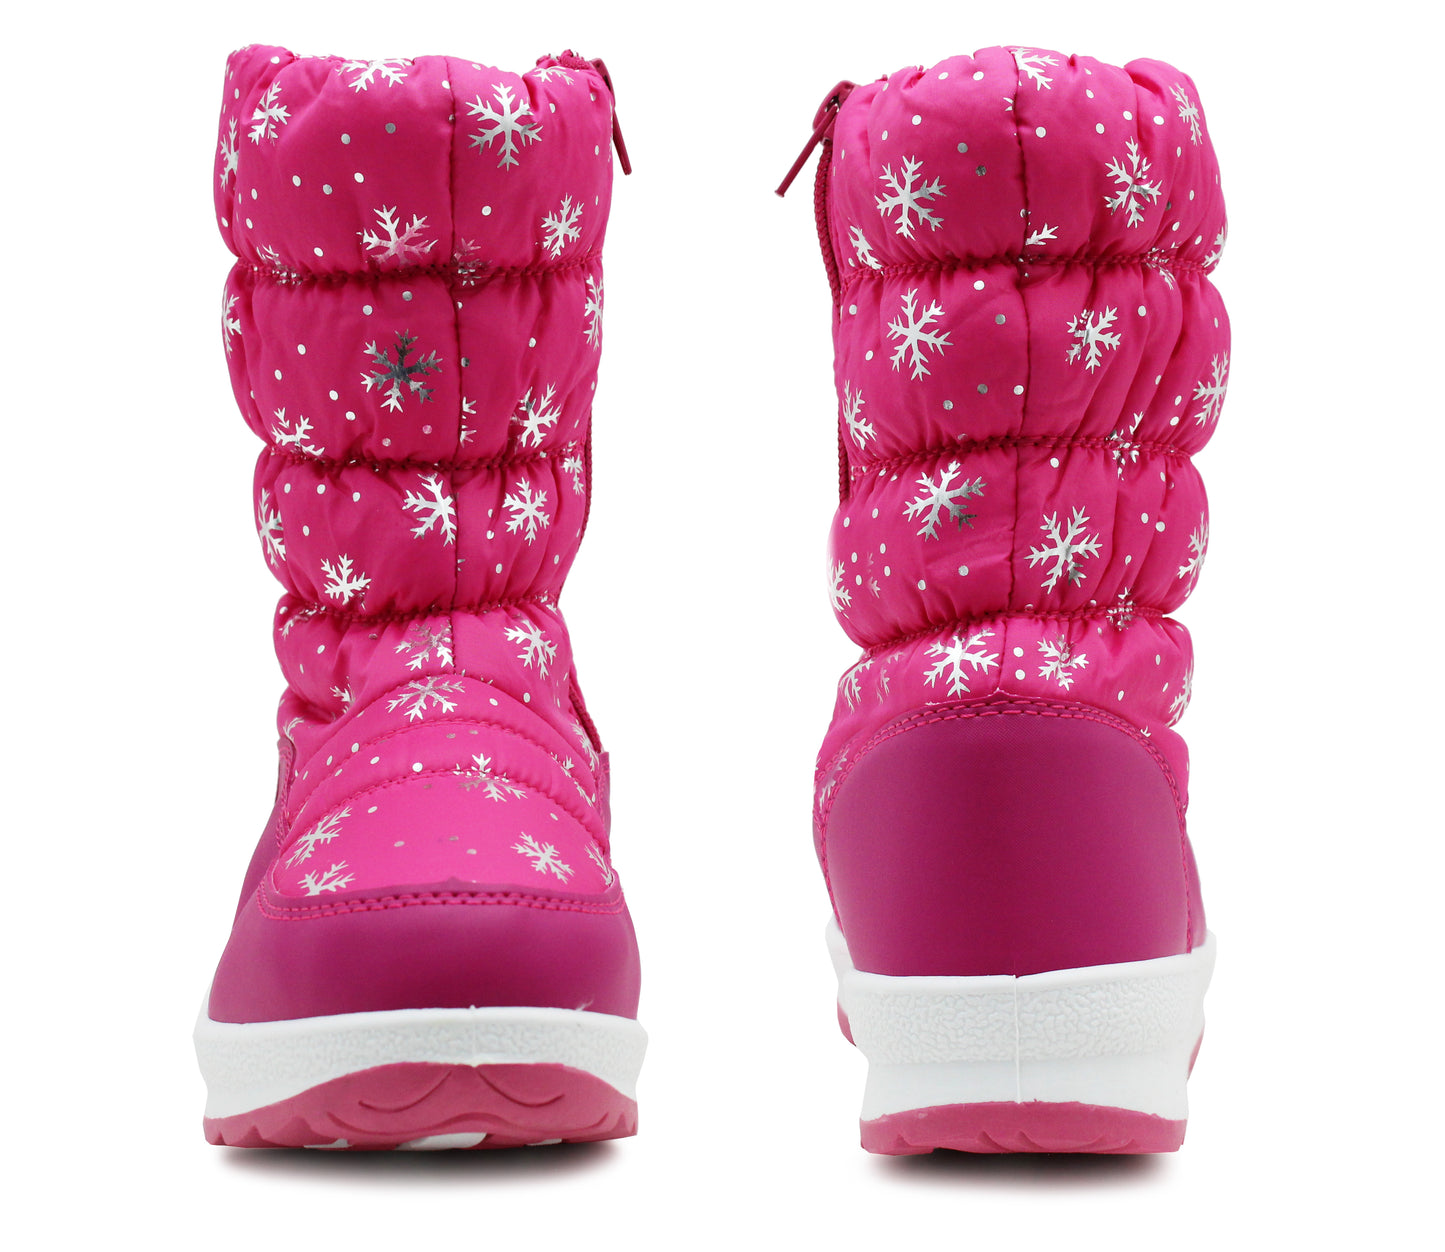 Girls Fuchsia Pink Winter Snow Boots Kids Thermal Quilted Faux Fur Lined Zip Up Mid Calf Ankle Booties